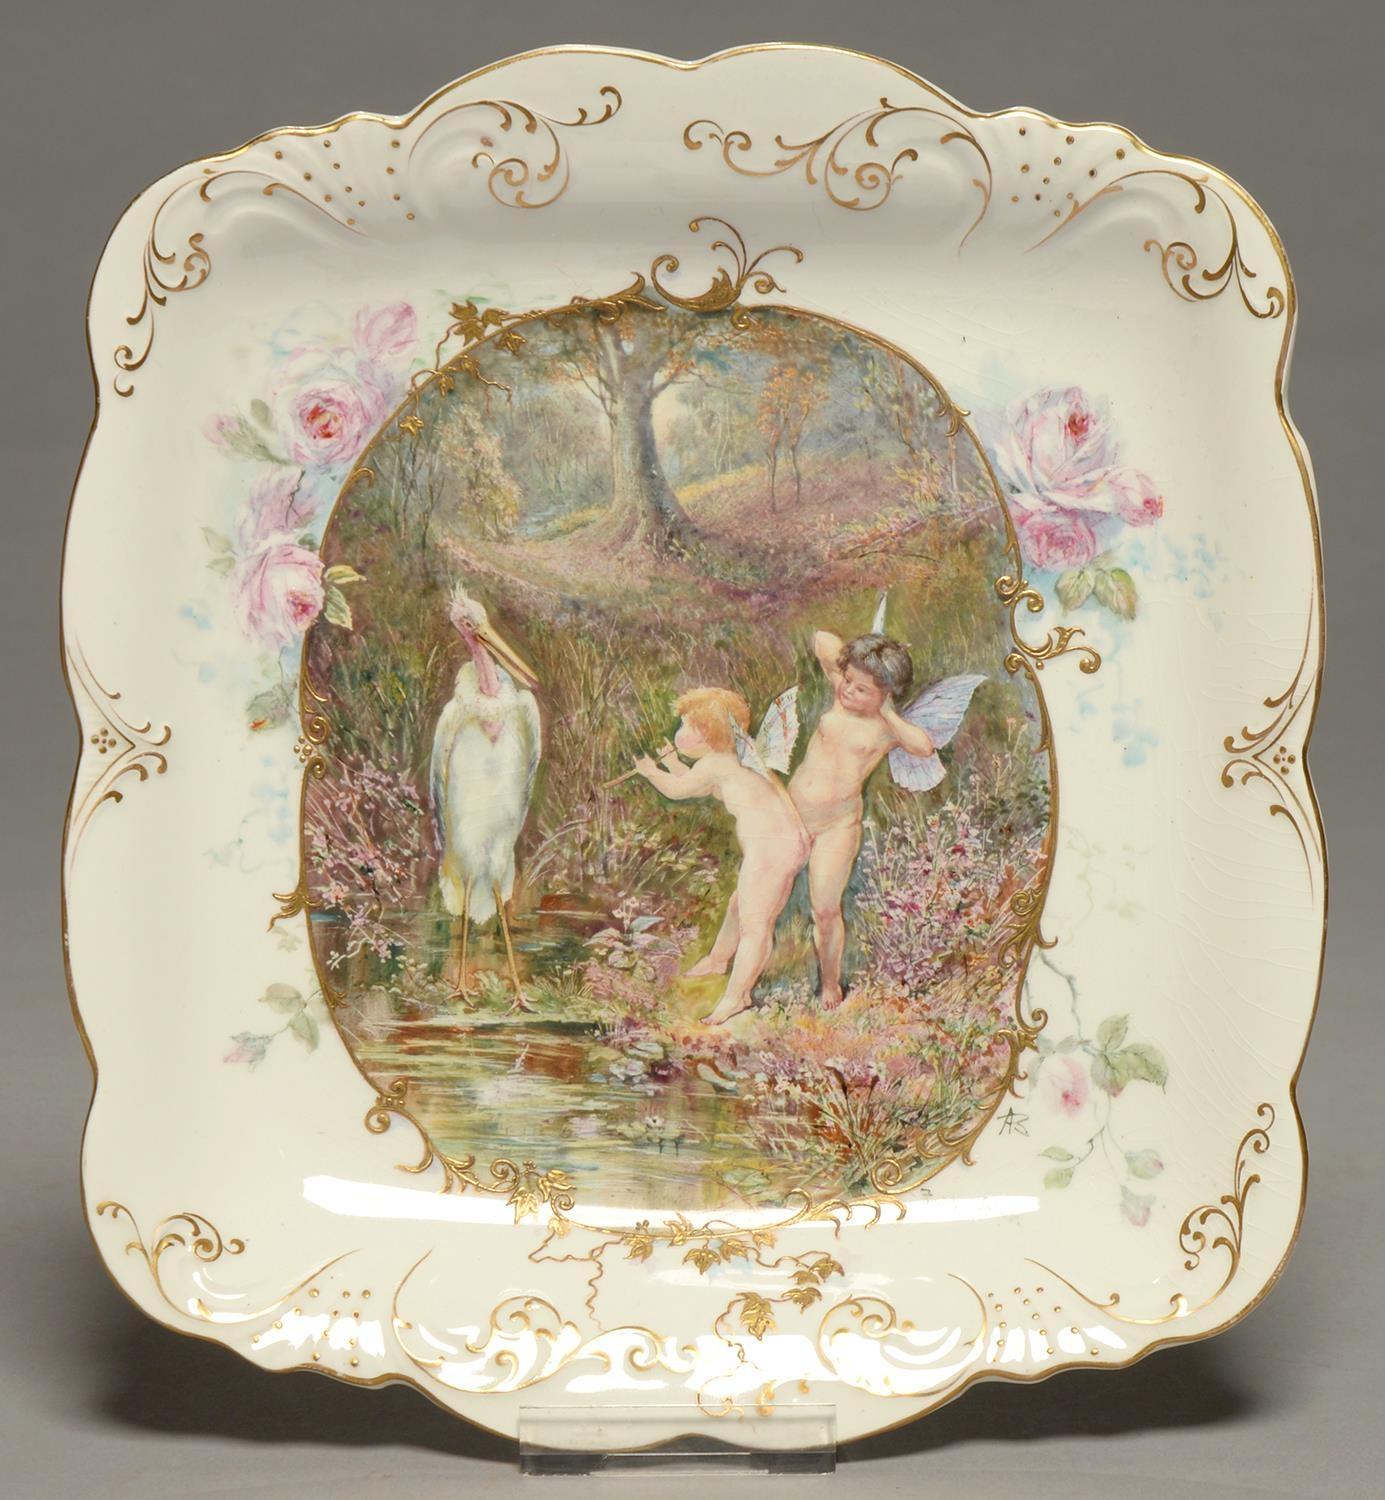 AN OUTSIDE DECORATED ALFRED MEAKIN LTD.  SHAPED SQUARE EARTHERNWARE DESSERT DISH, C1900, PAINTED